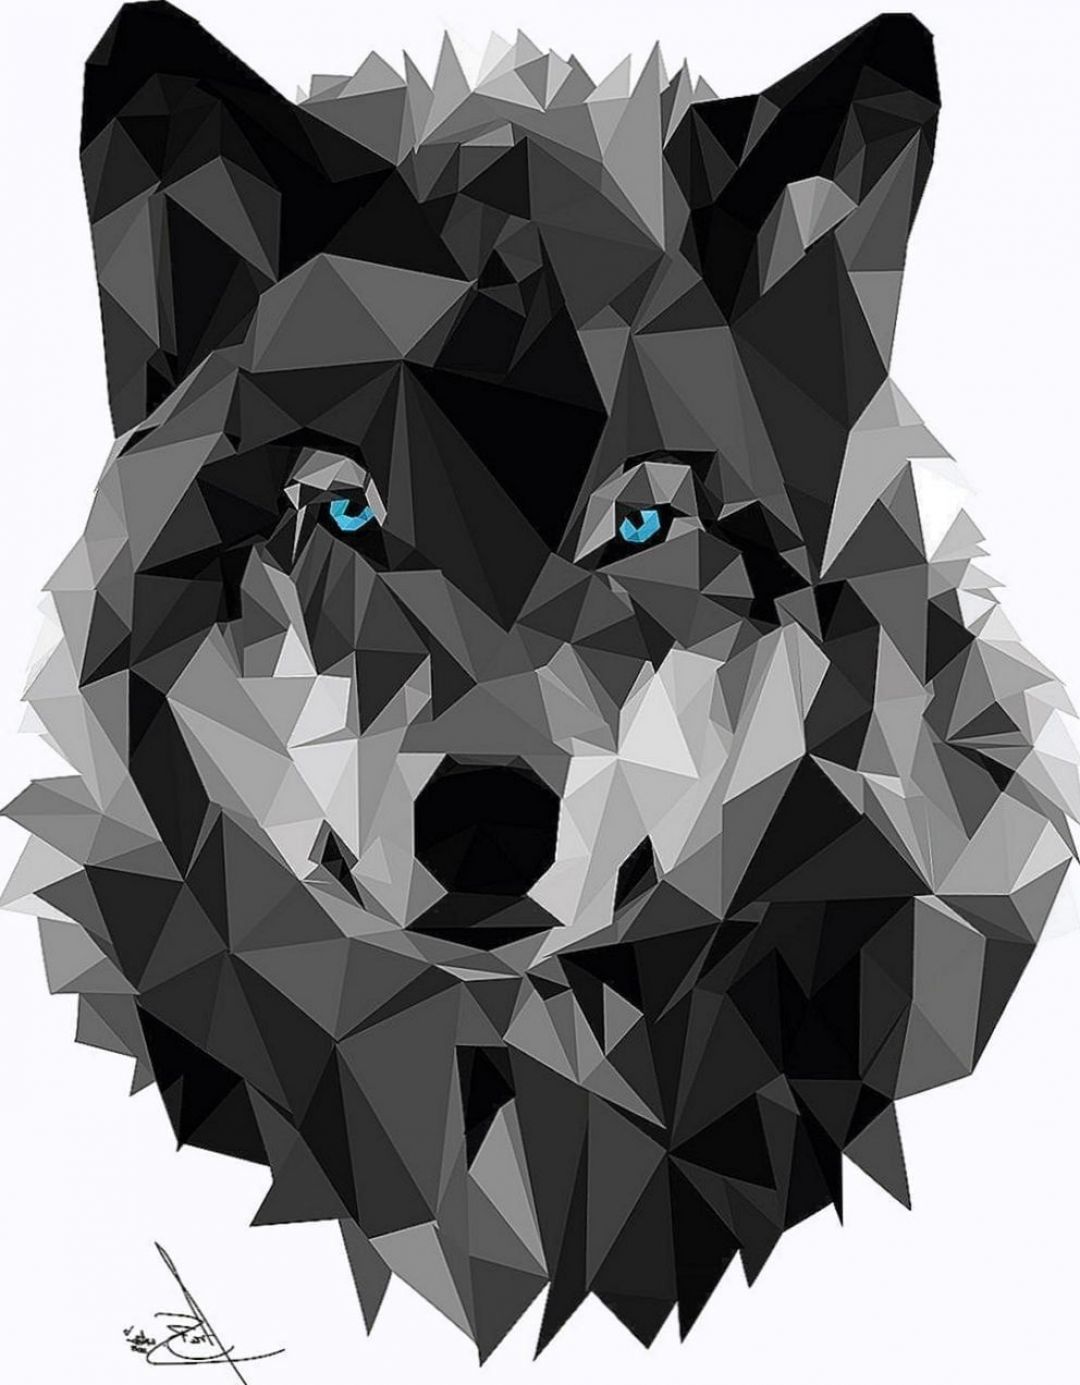 Android, Iphone, Desktop Hd Backgrounds / Wallpapers - Geometric Wolf Art - HD Wallpaper 